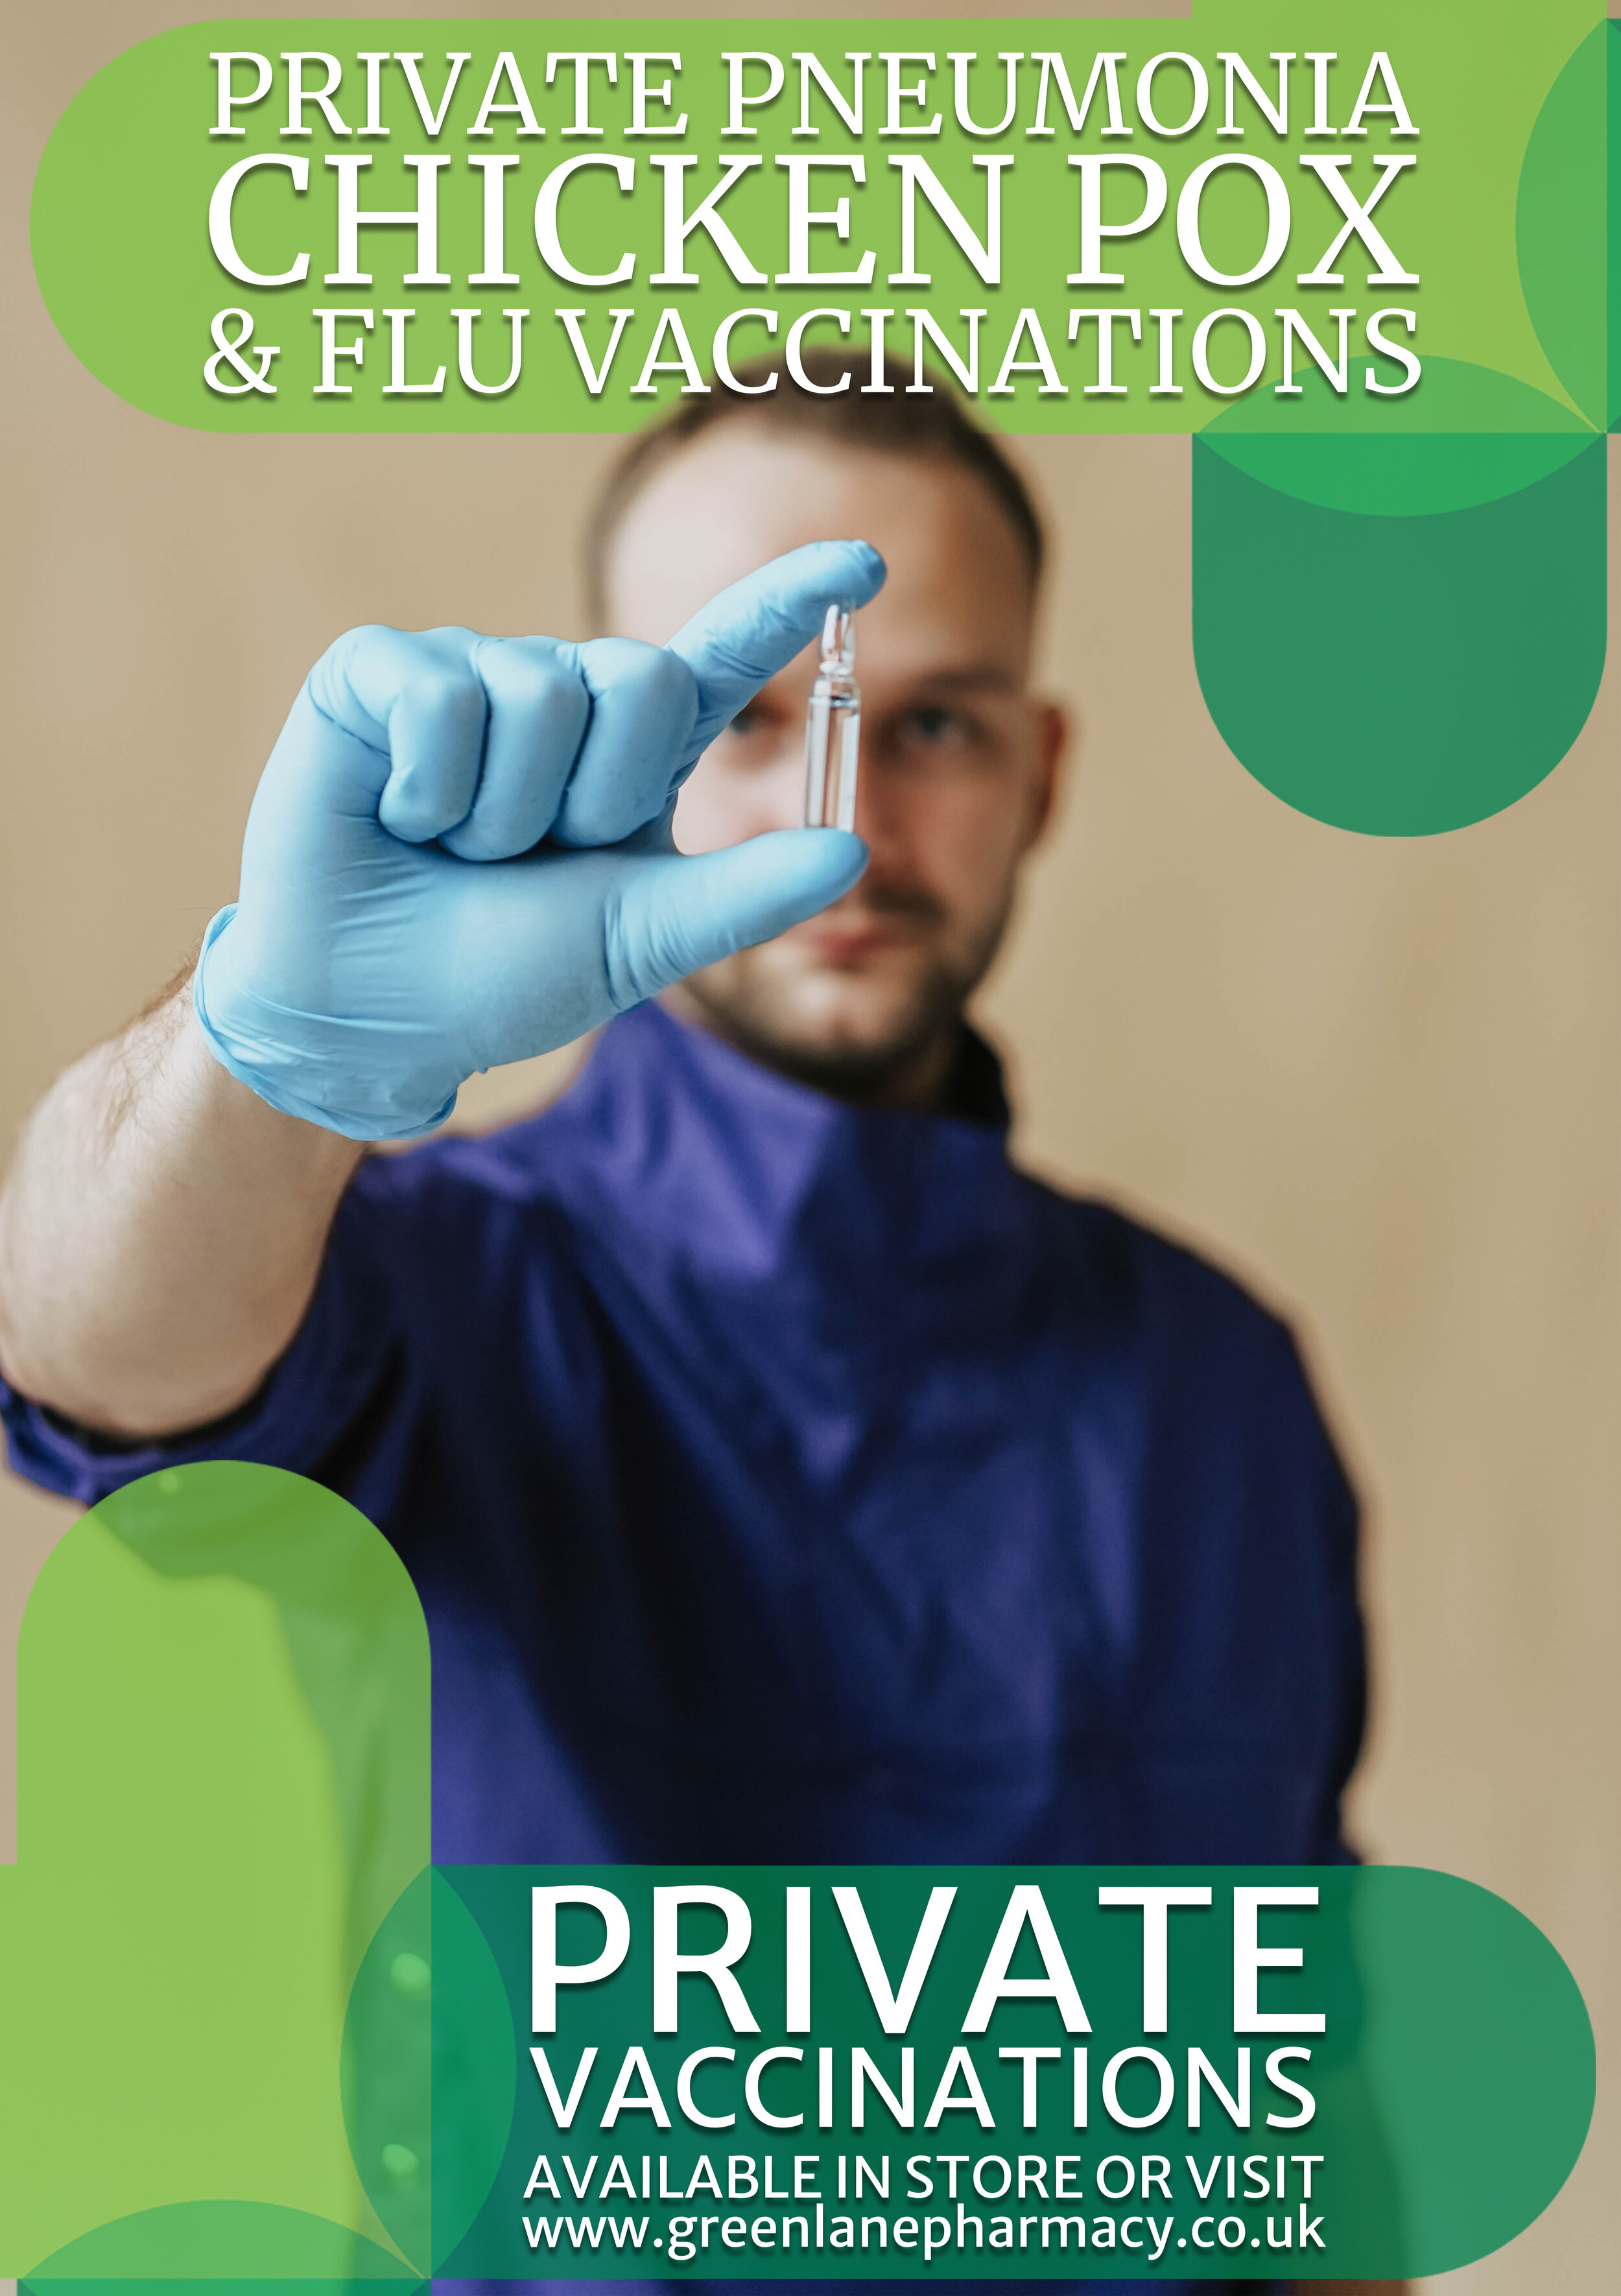 Vaccinations Poster.jpg